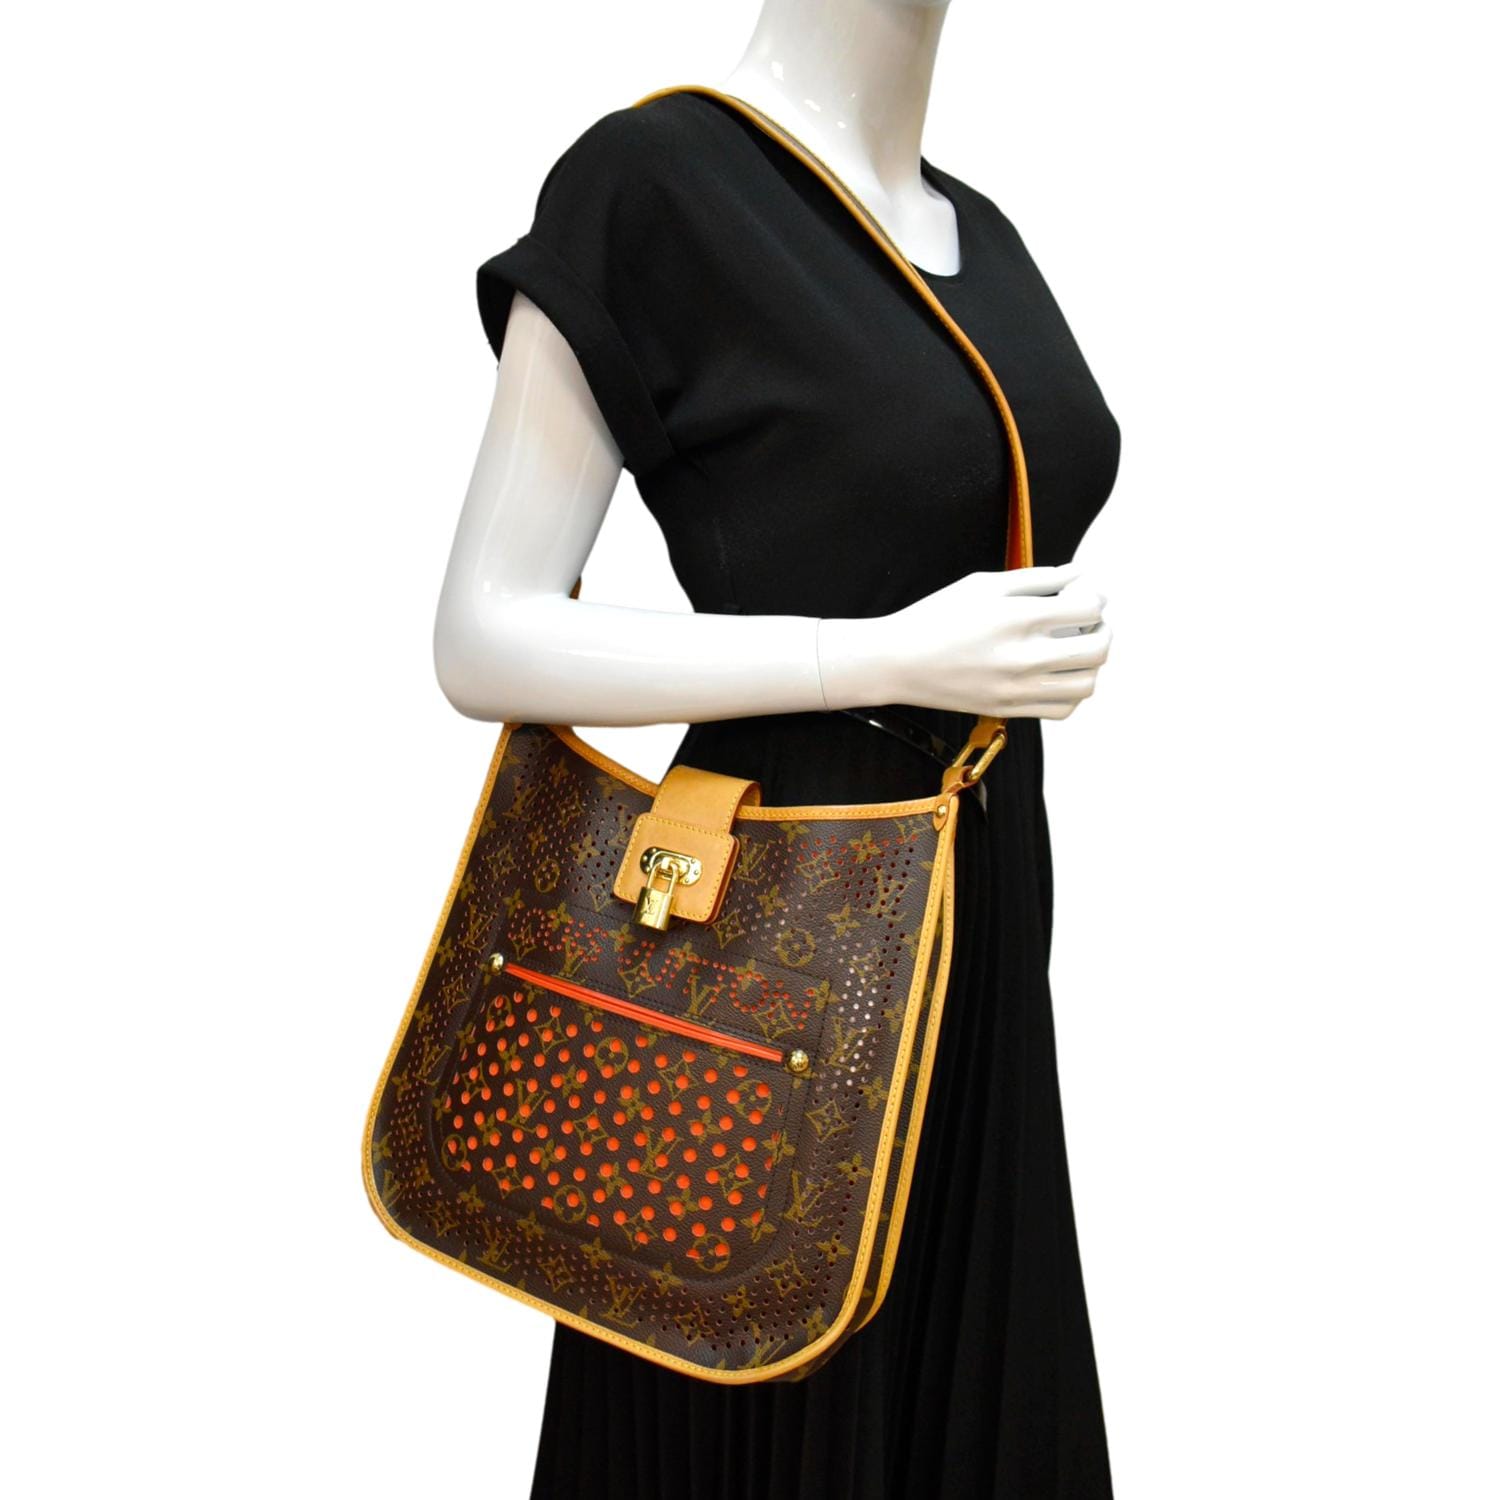 LOUIS VUITTON Perforated Musette Monogram Canvas Crossbody Bag Brown